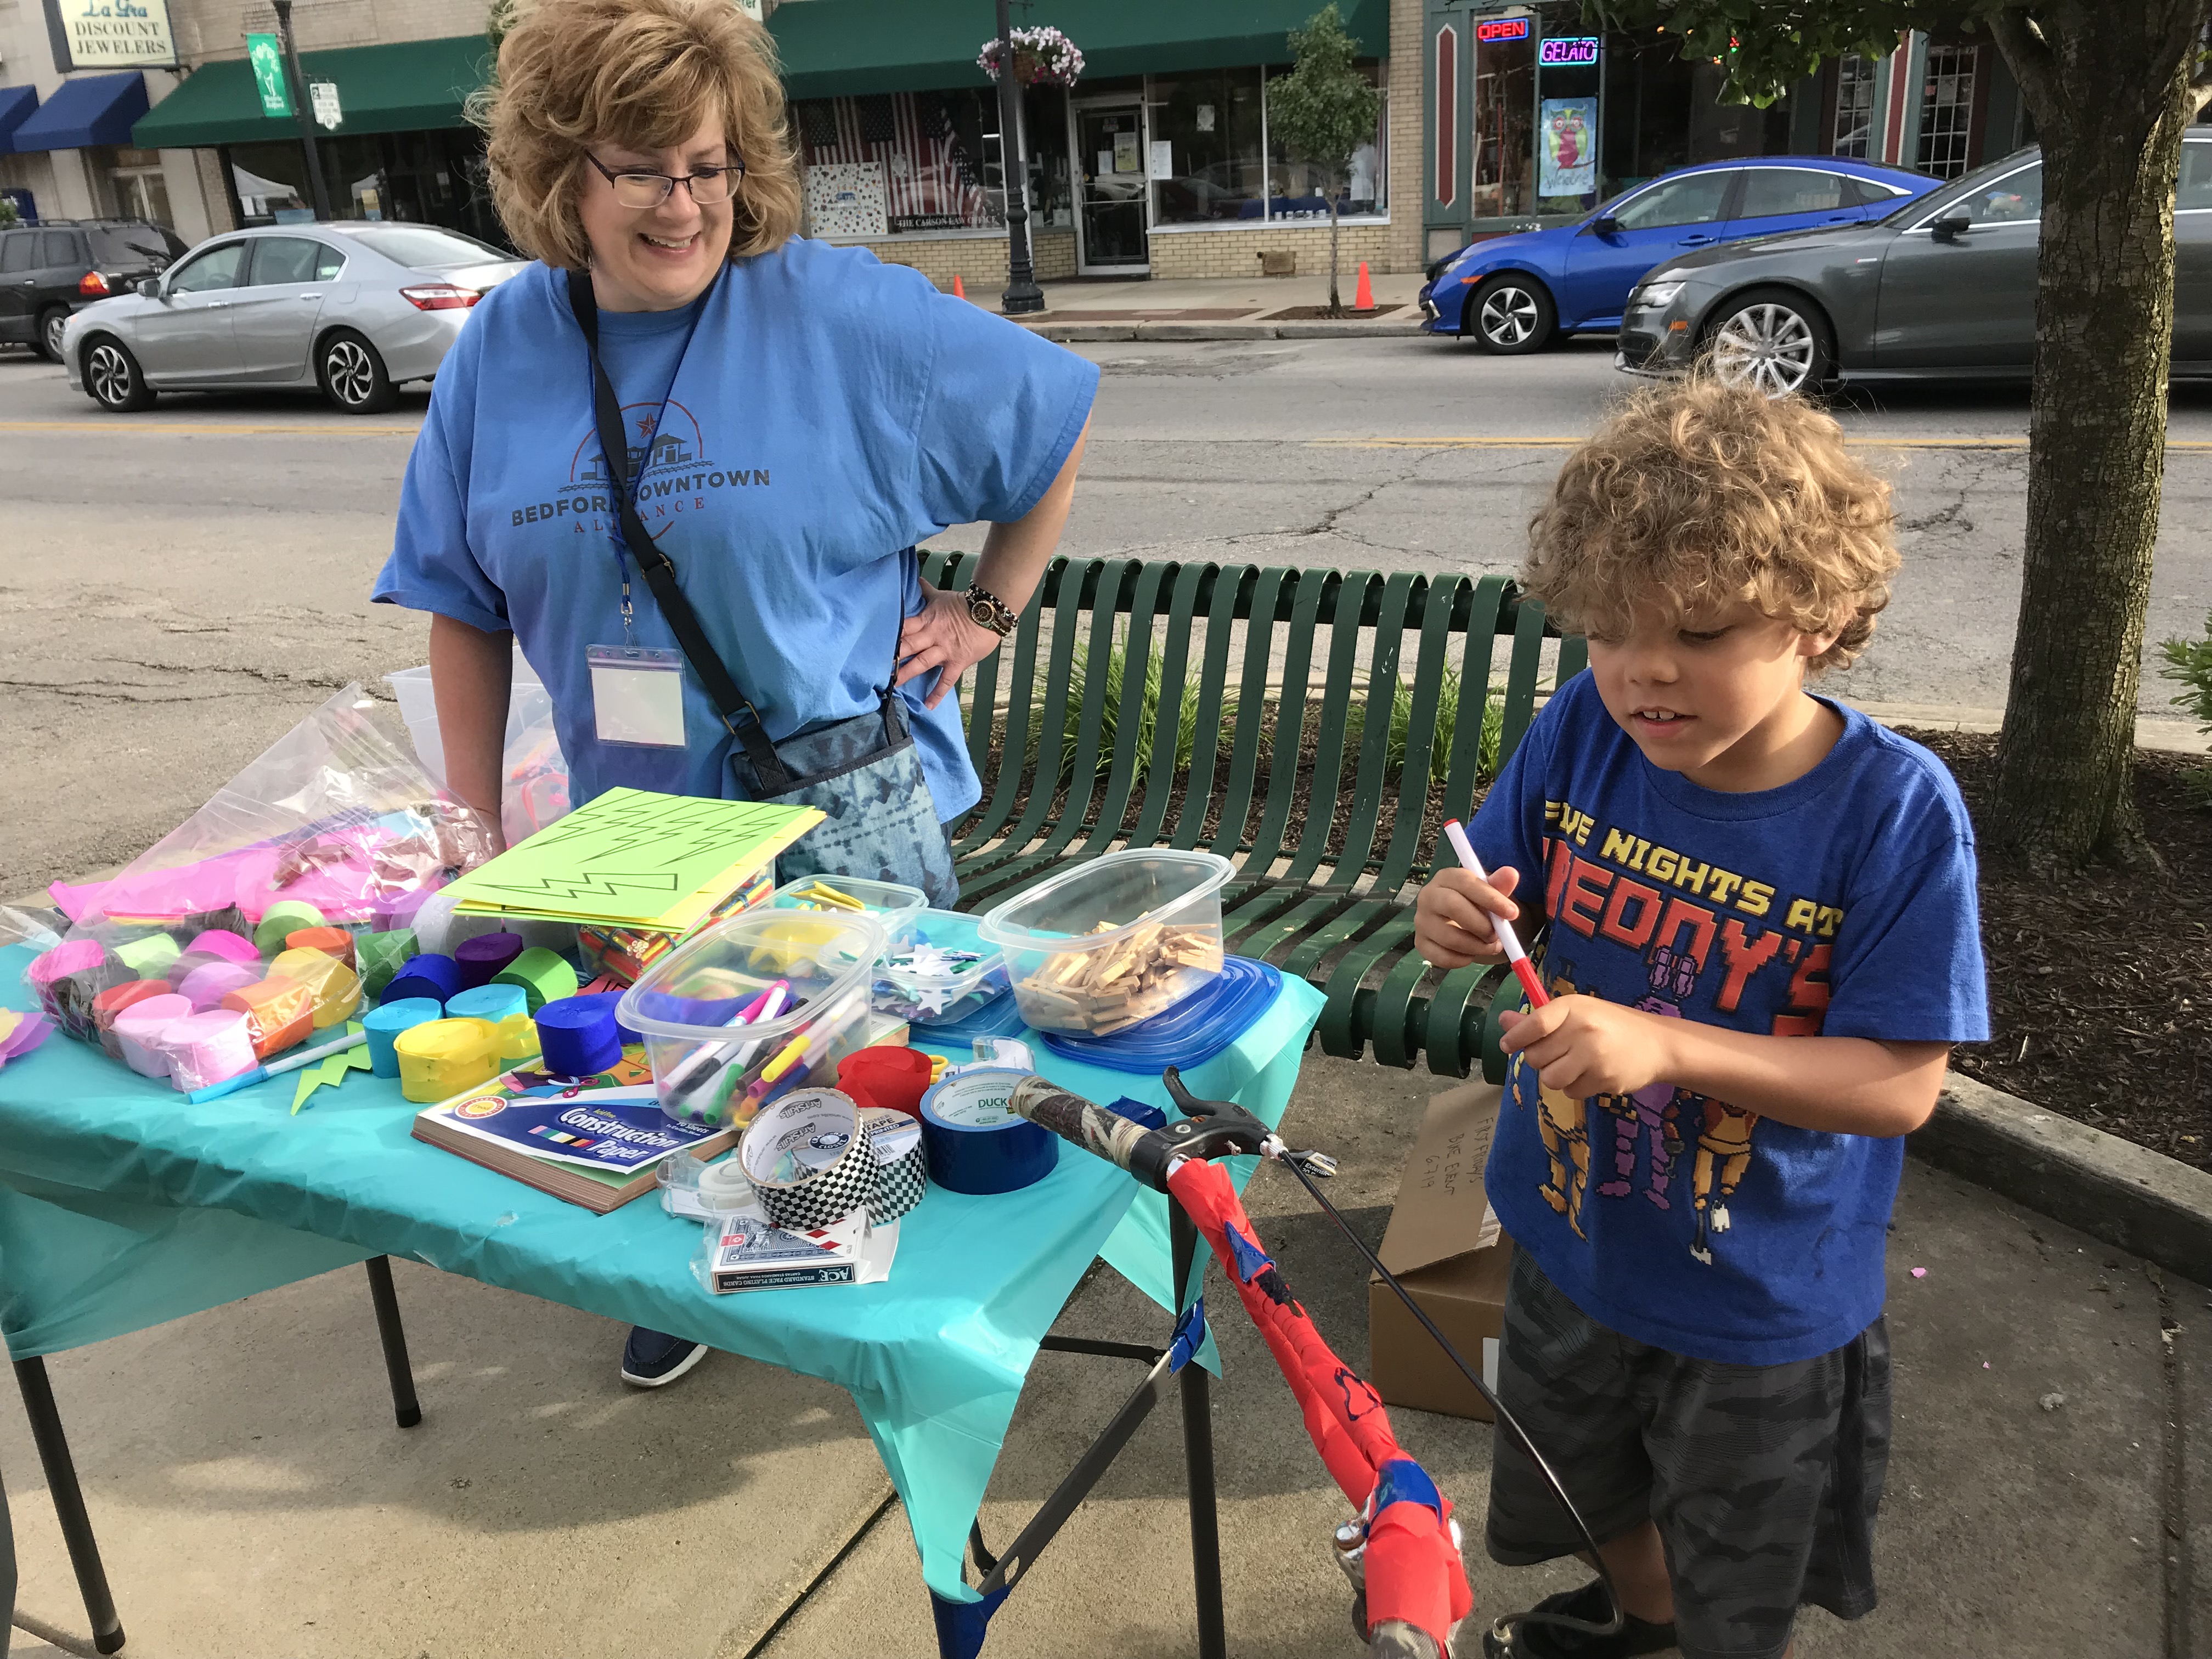 Bedford Alliance’s First Fridays drawing residents downtown